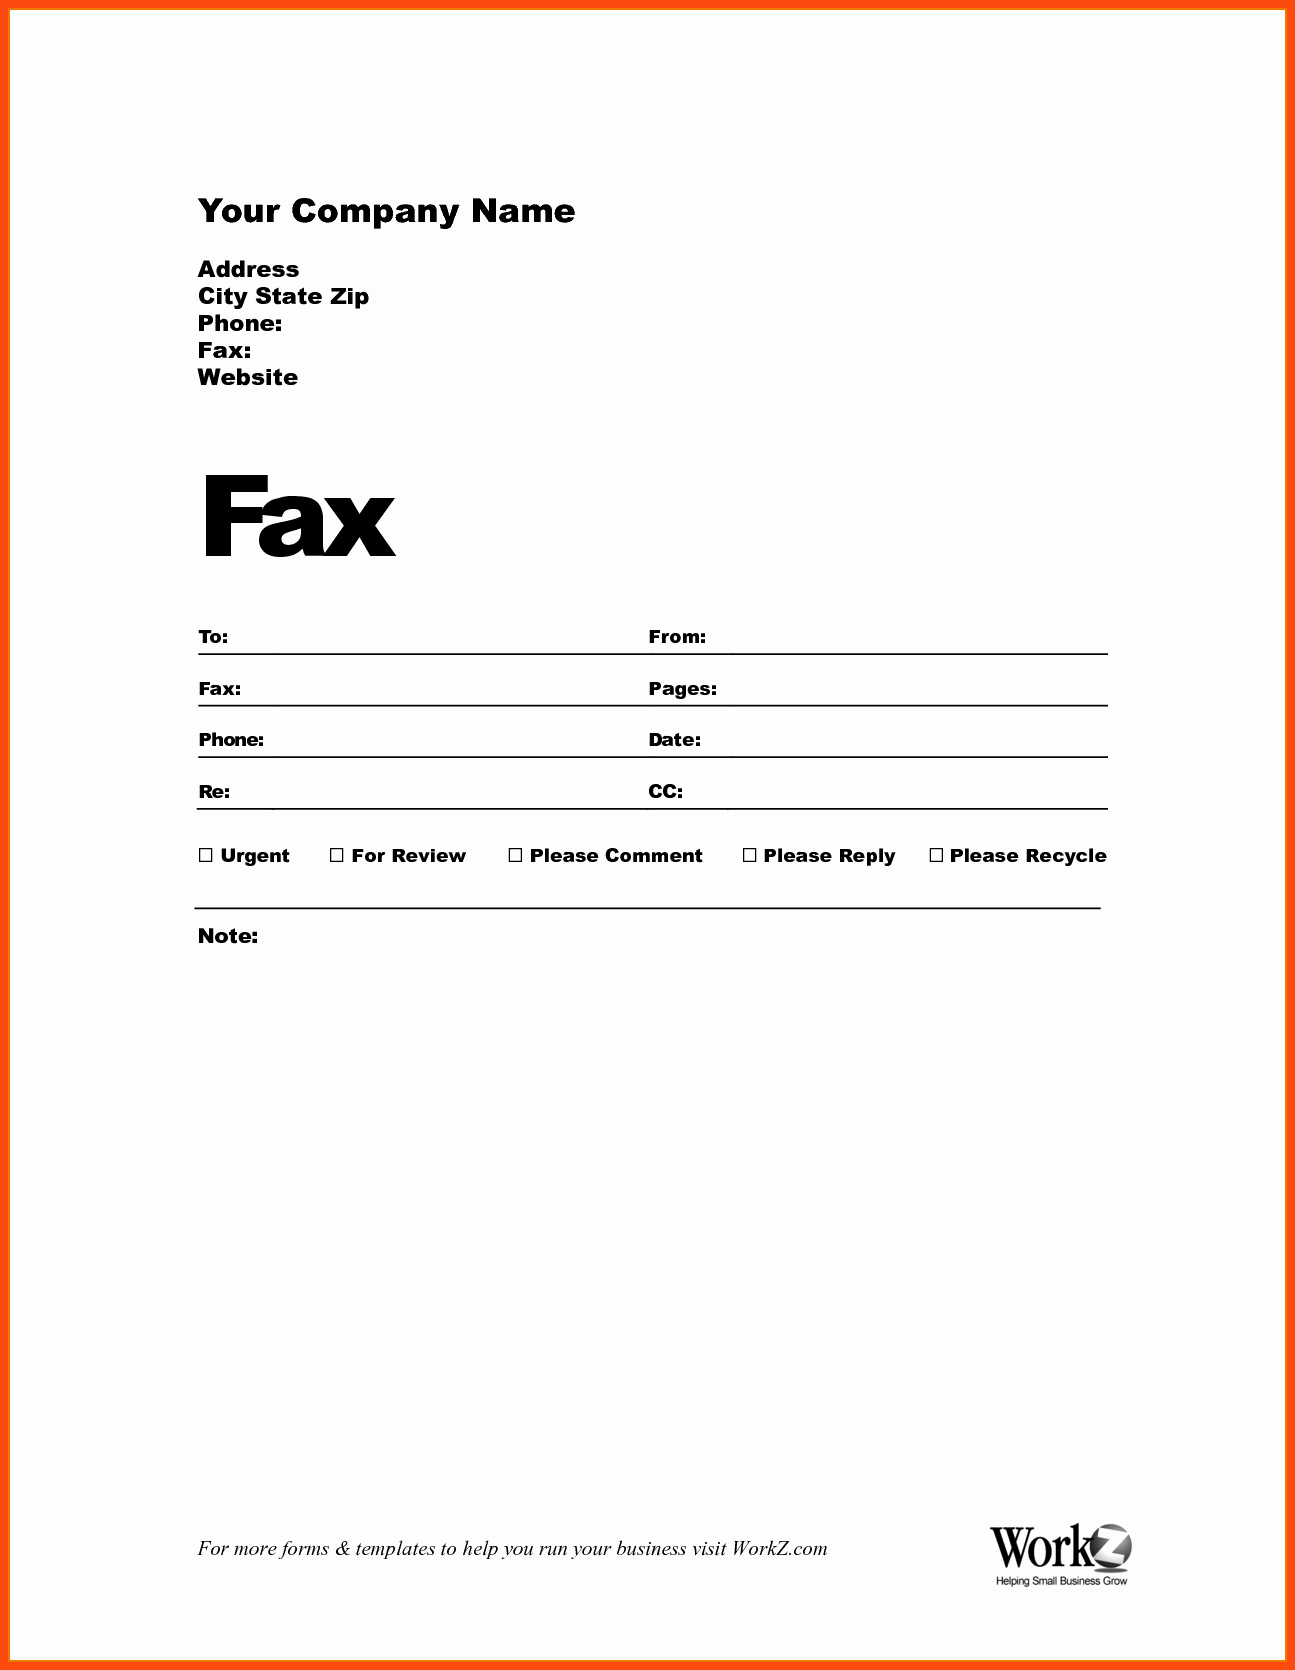 how to fill out a fax cover sheet